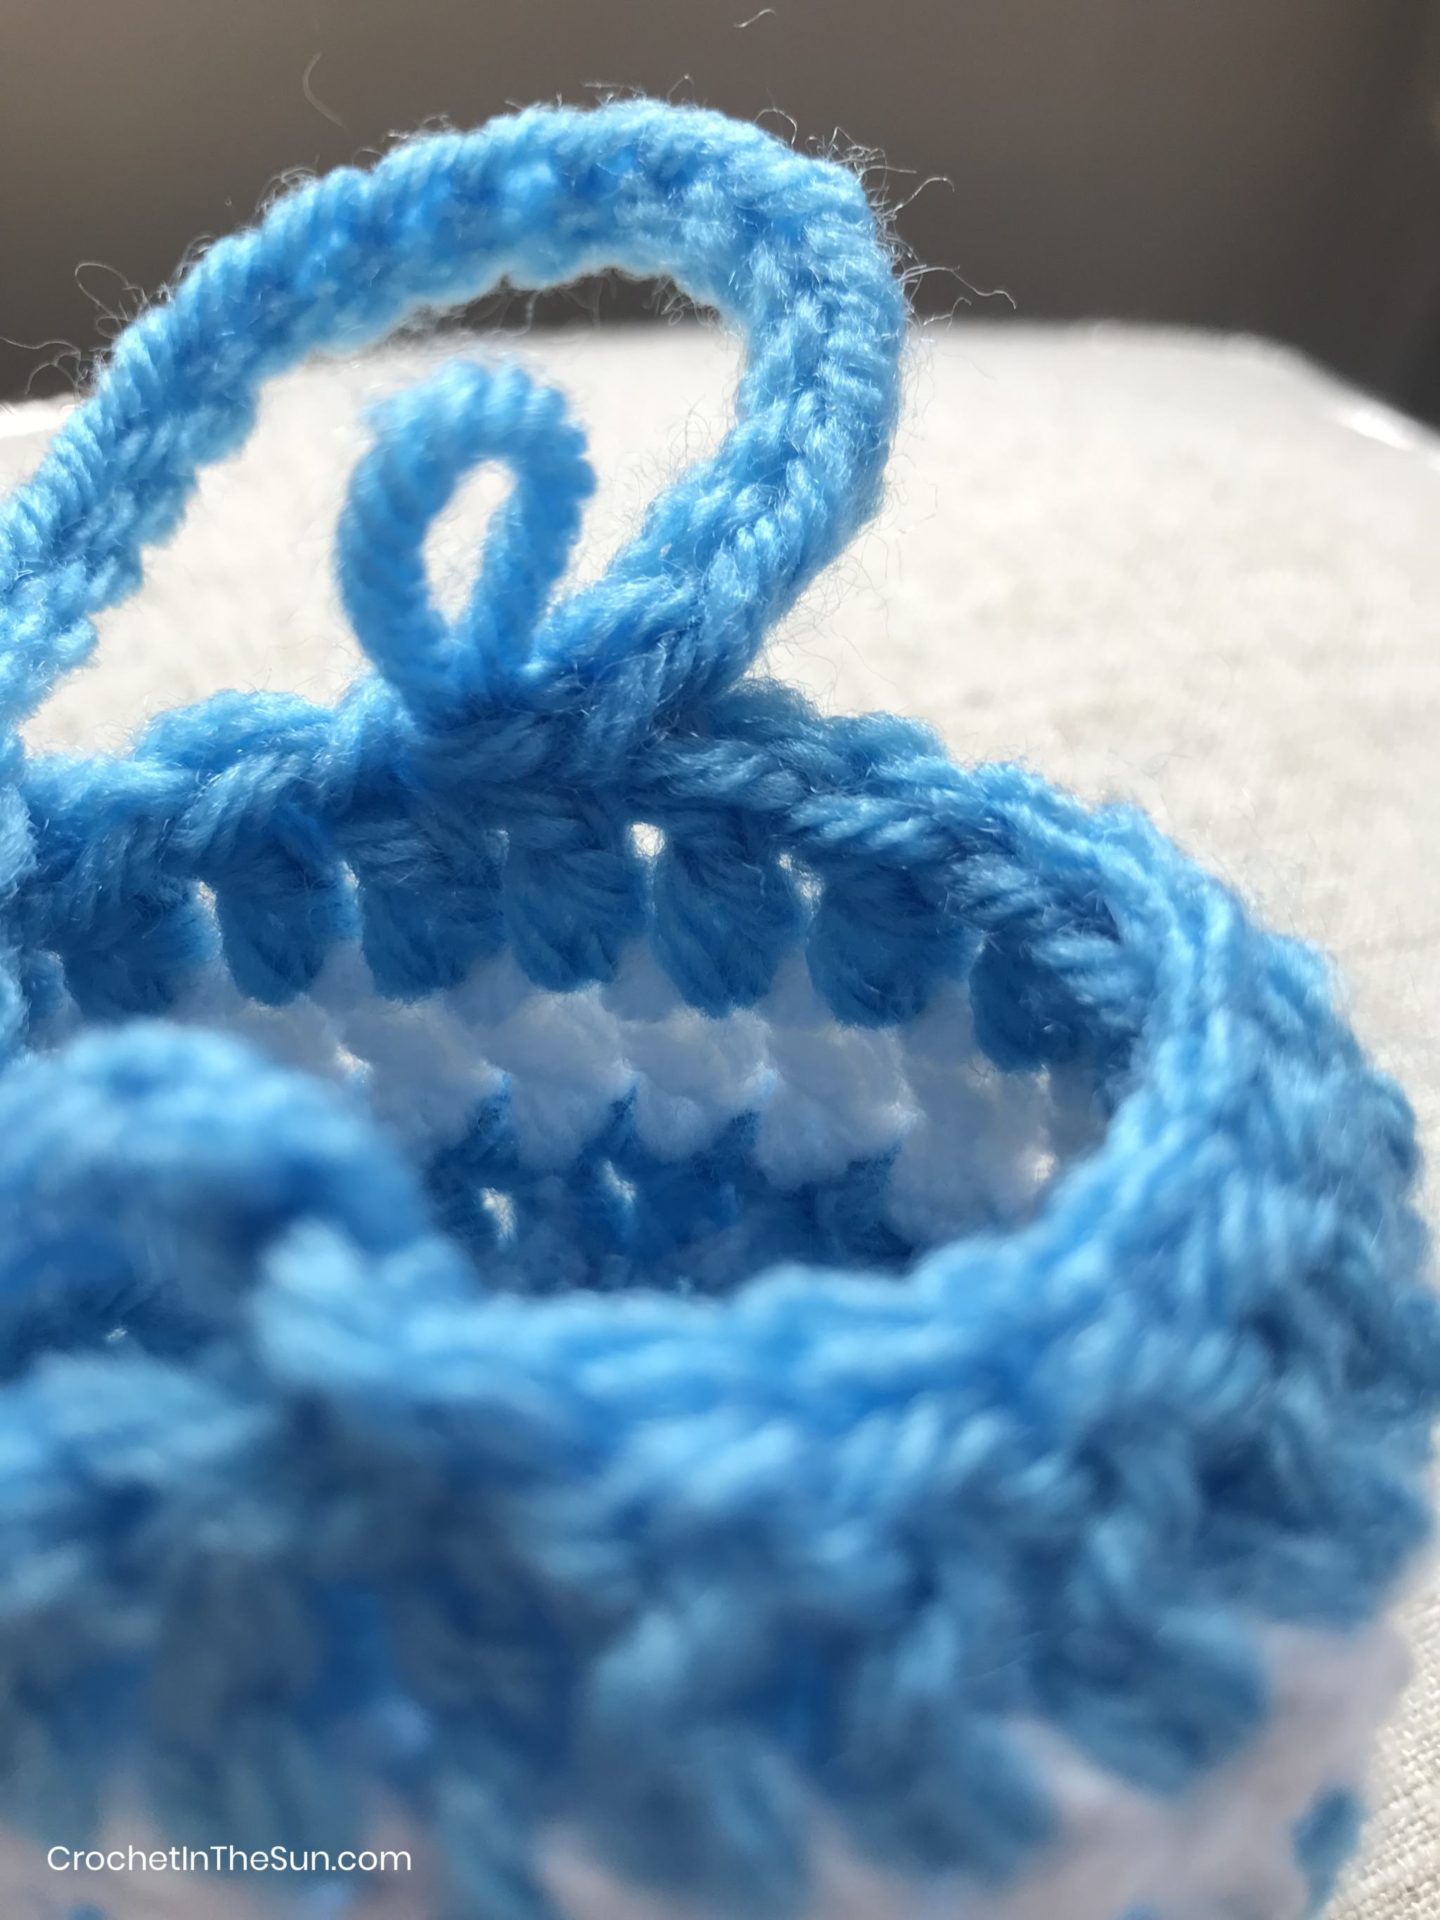 Slip stitch to attach the handle back to the other end of the easter basket.
#crochet #crochetinthesun #howtocrochet #crochettutorial #crochetforbeginners